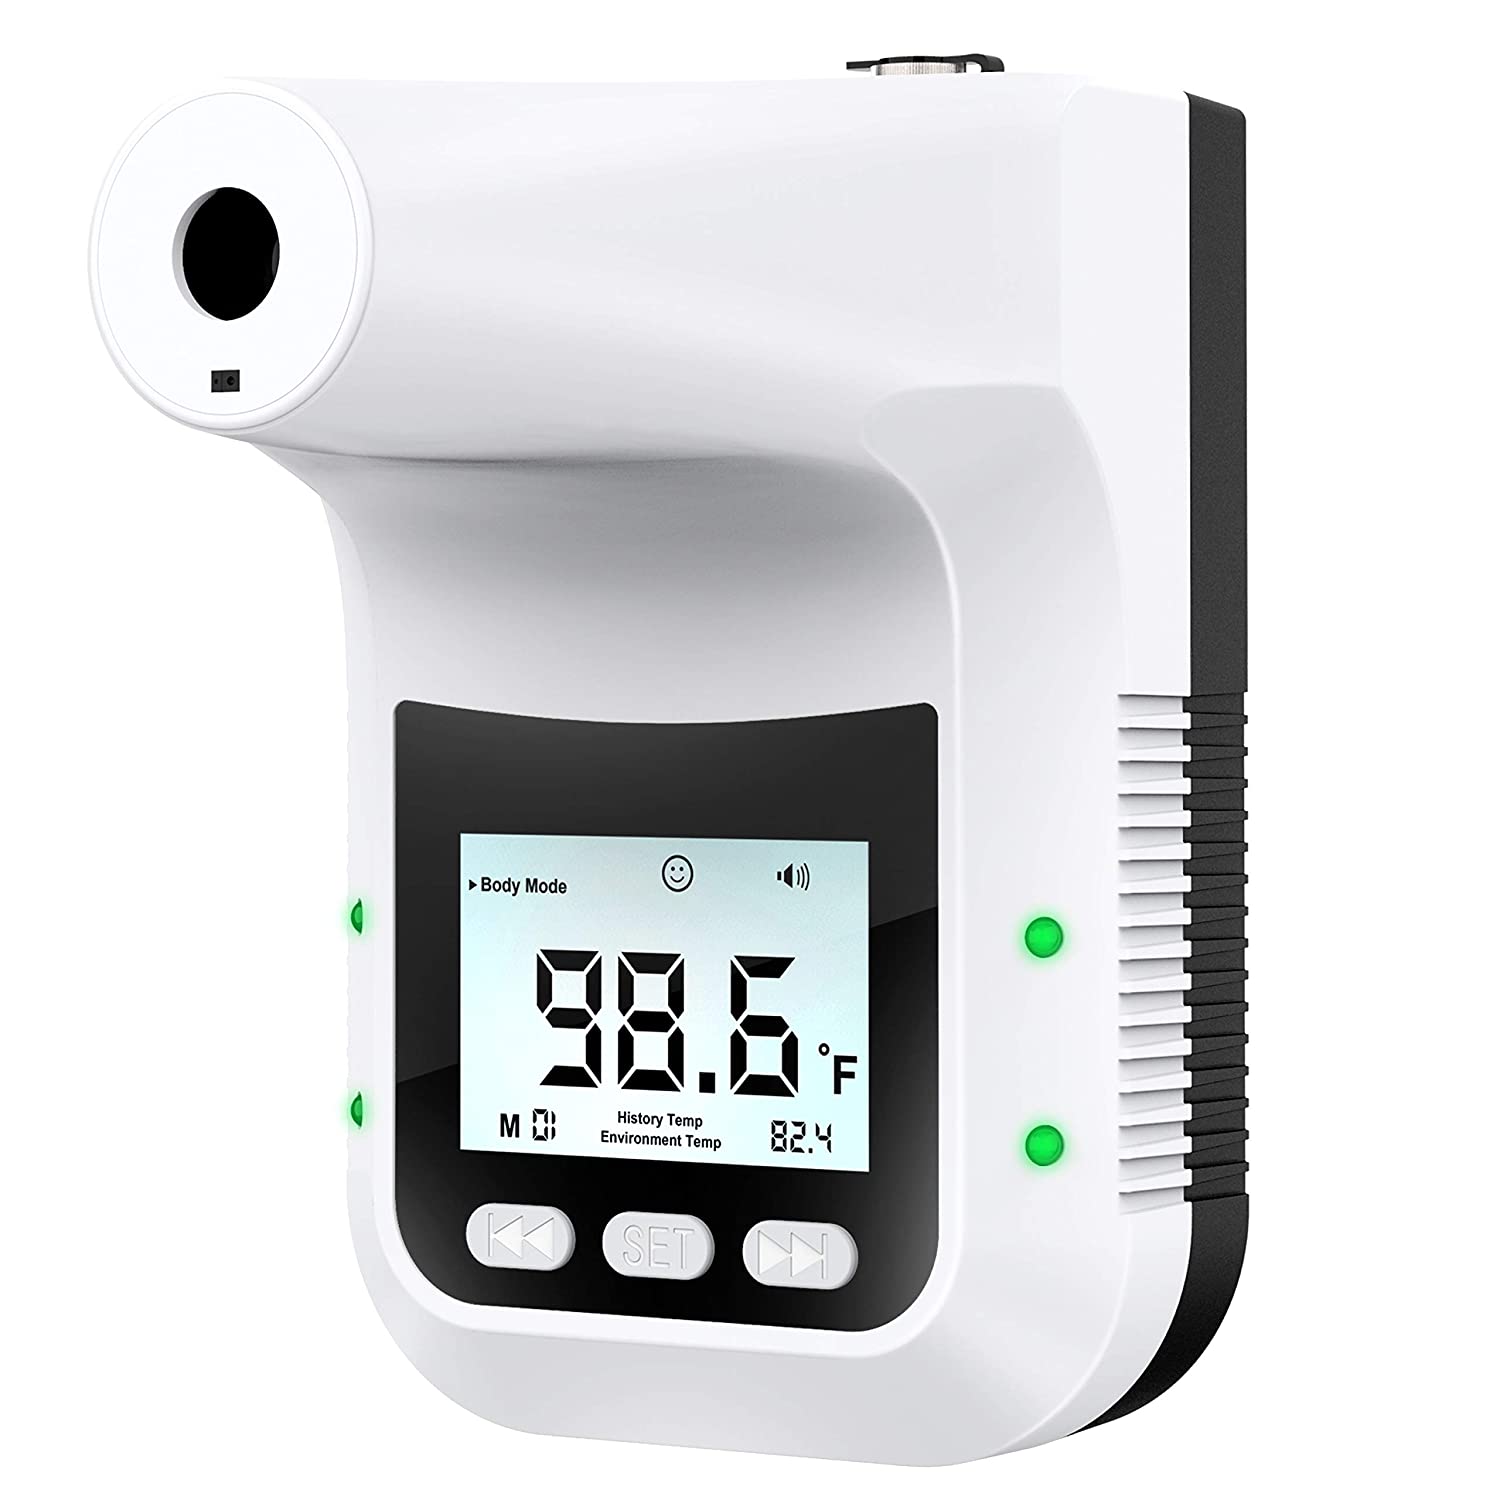 Wall Mounted Infrared Thermometer for Non-Contact Forehead 0.5s Quick Test with Large LCD Display Fever Alarm for Office/Company/Factory/Shop/School/Restaurant 